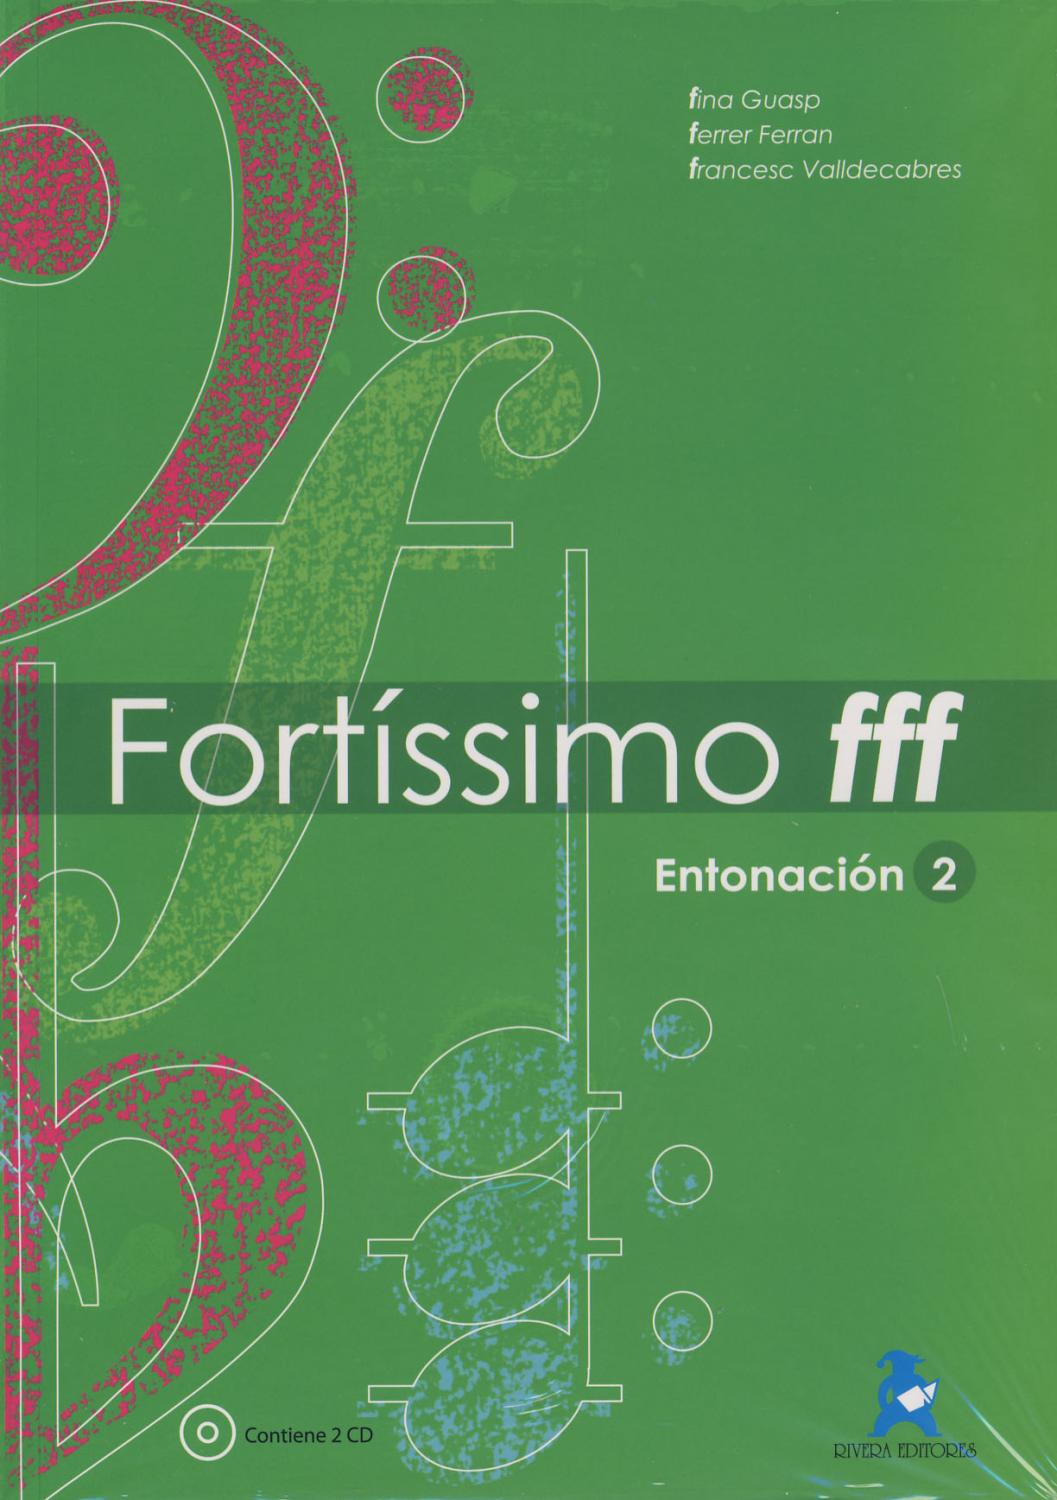 GUASP/FERRER/VALLDECABRES - Fortissimo fff (Entonacion 2) (Inc.CD) - GUASP/FERRER/VALLDECABRES